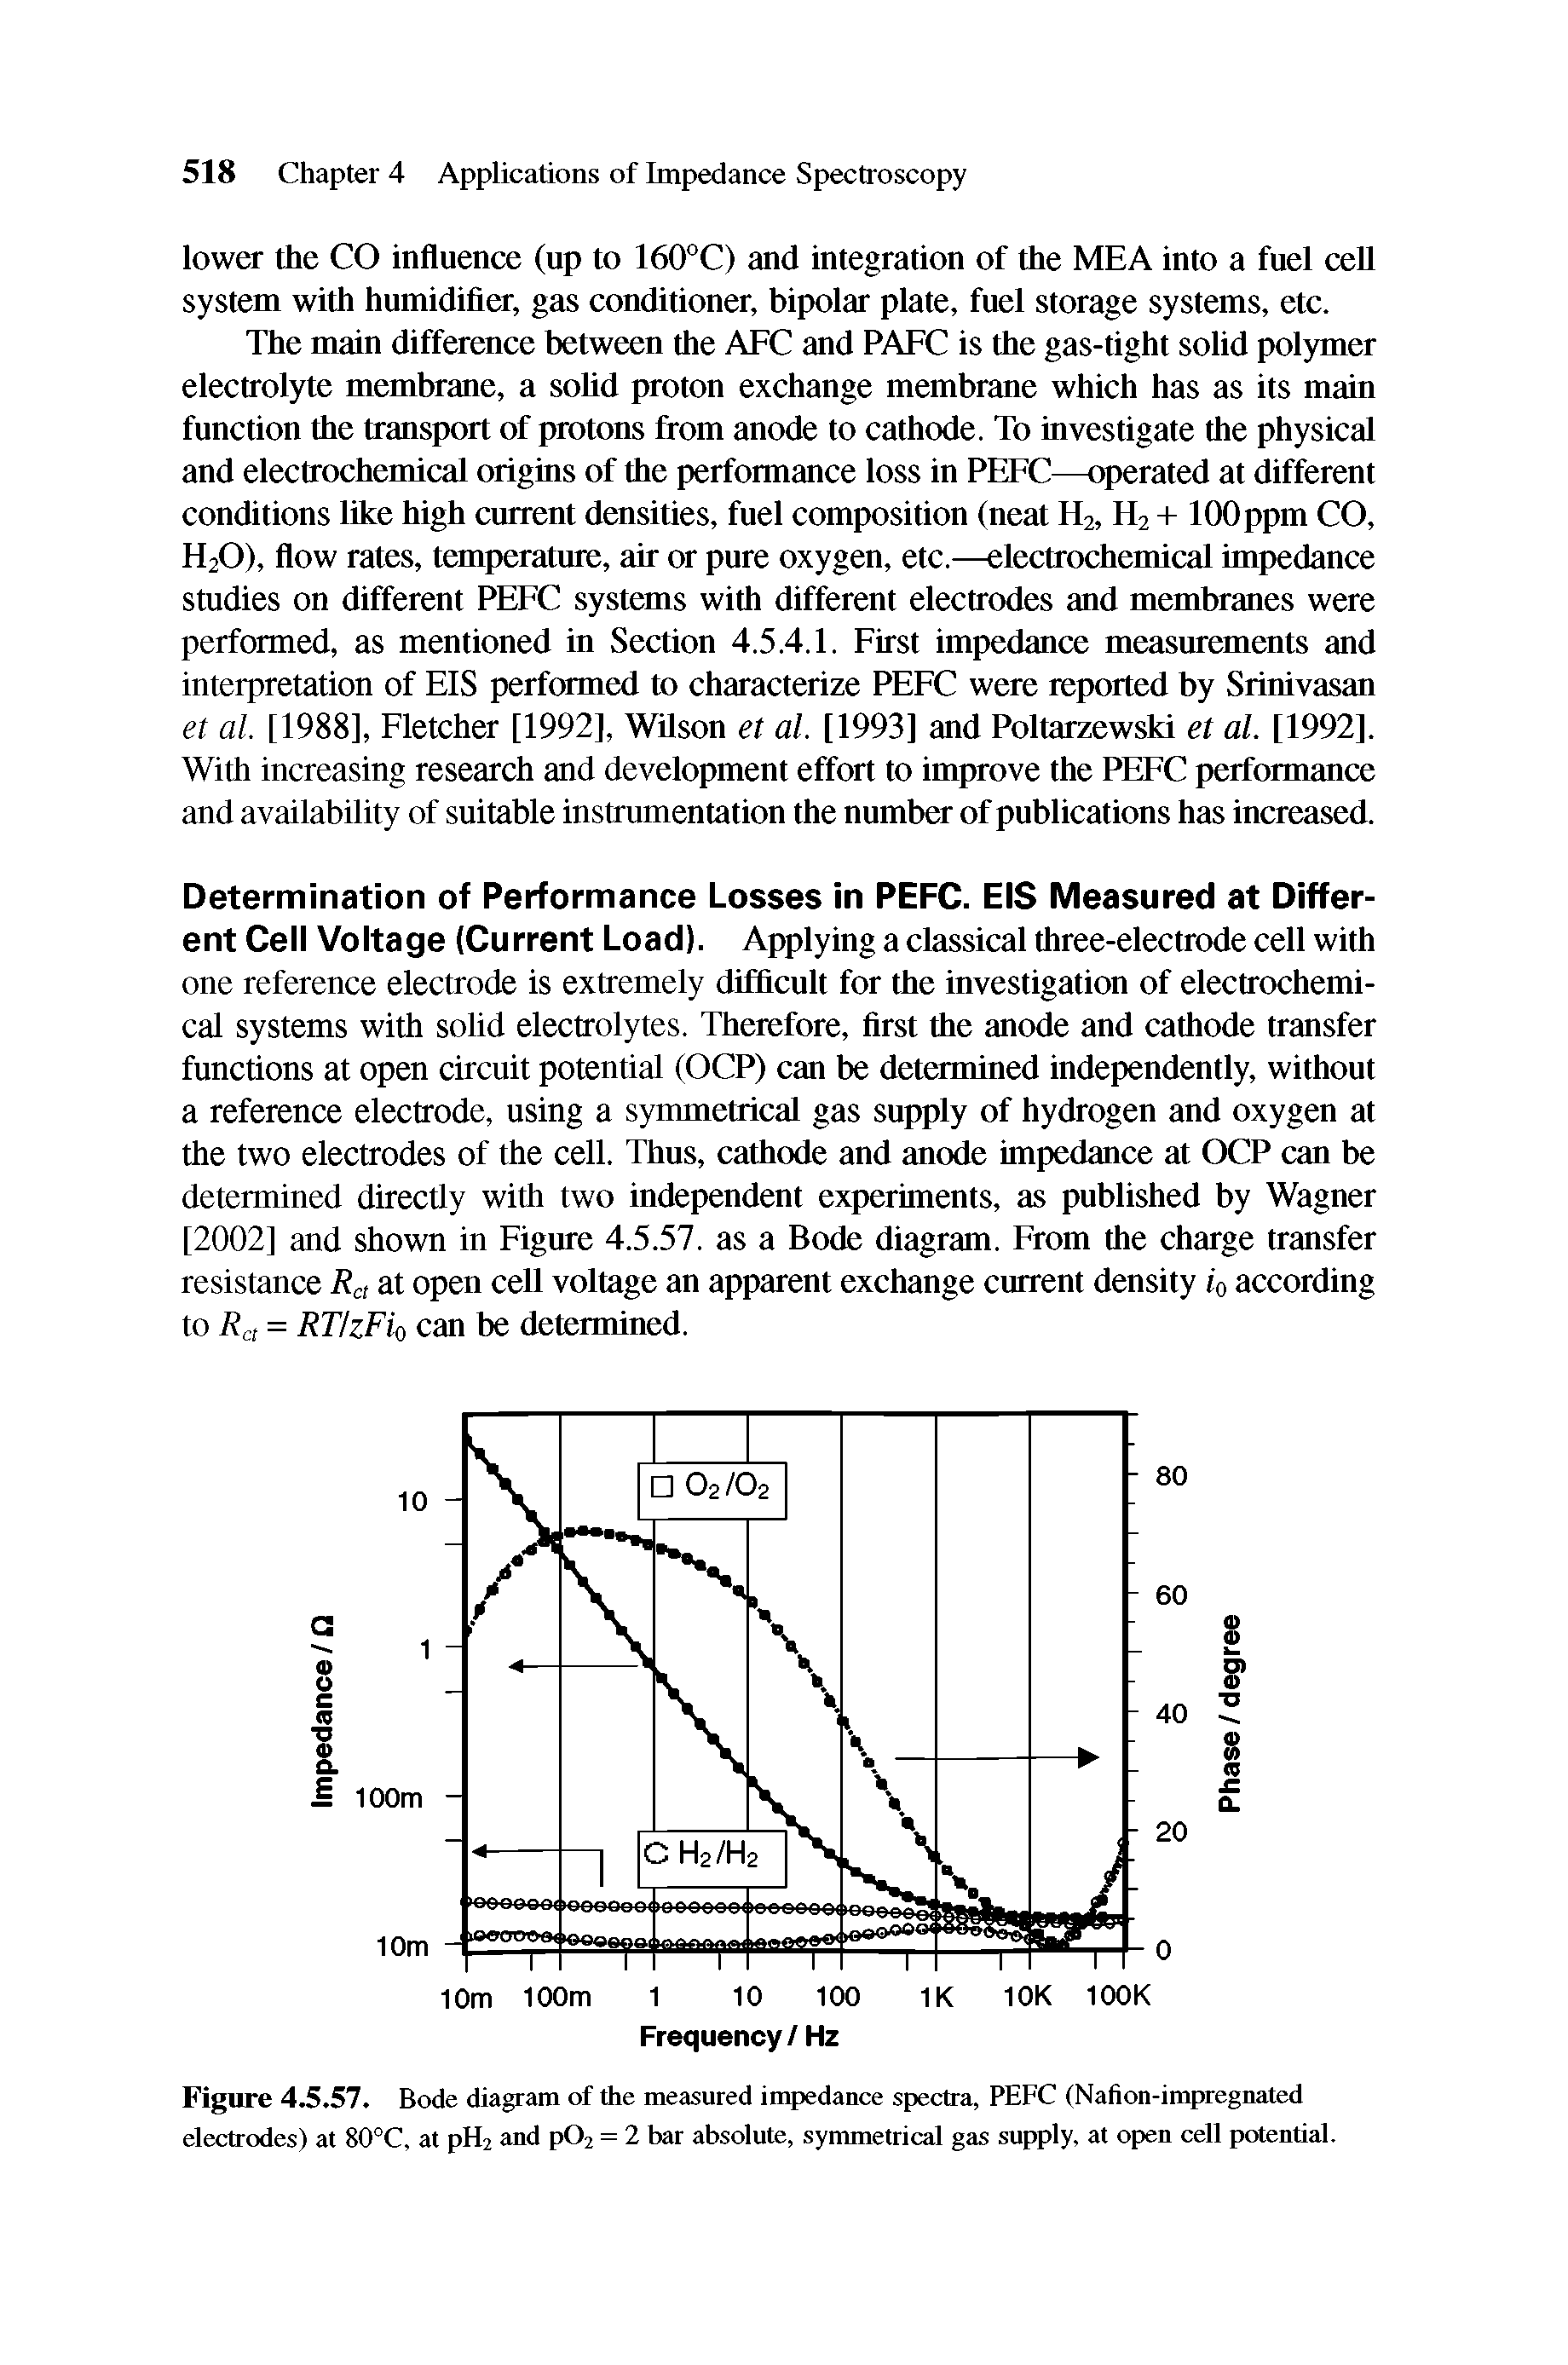 Figure 4.5.57. Bode diagram of the measured impedance spectra, PEFC (Nation-impregnated electrodes) at 80°C, at pH2 and PO2 = 2 bar absolute, symmetrical gas supply, at open cell potential.